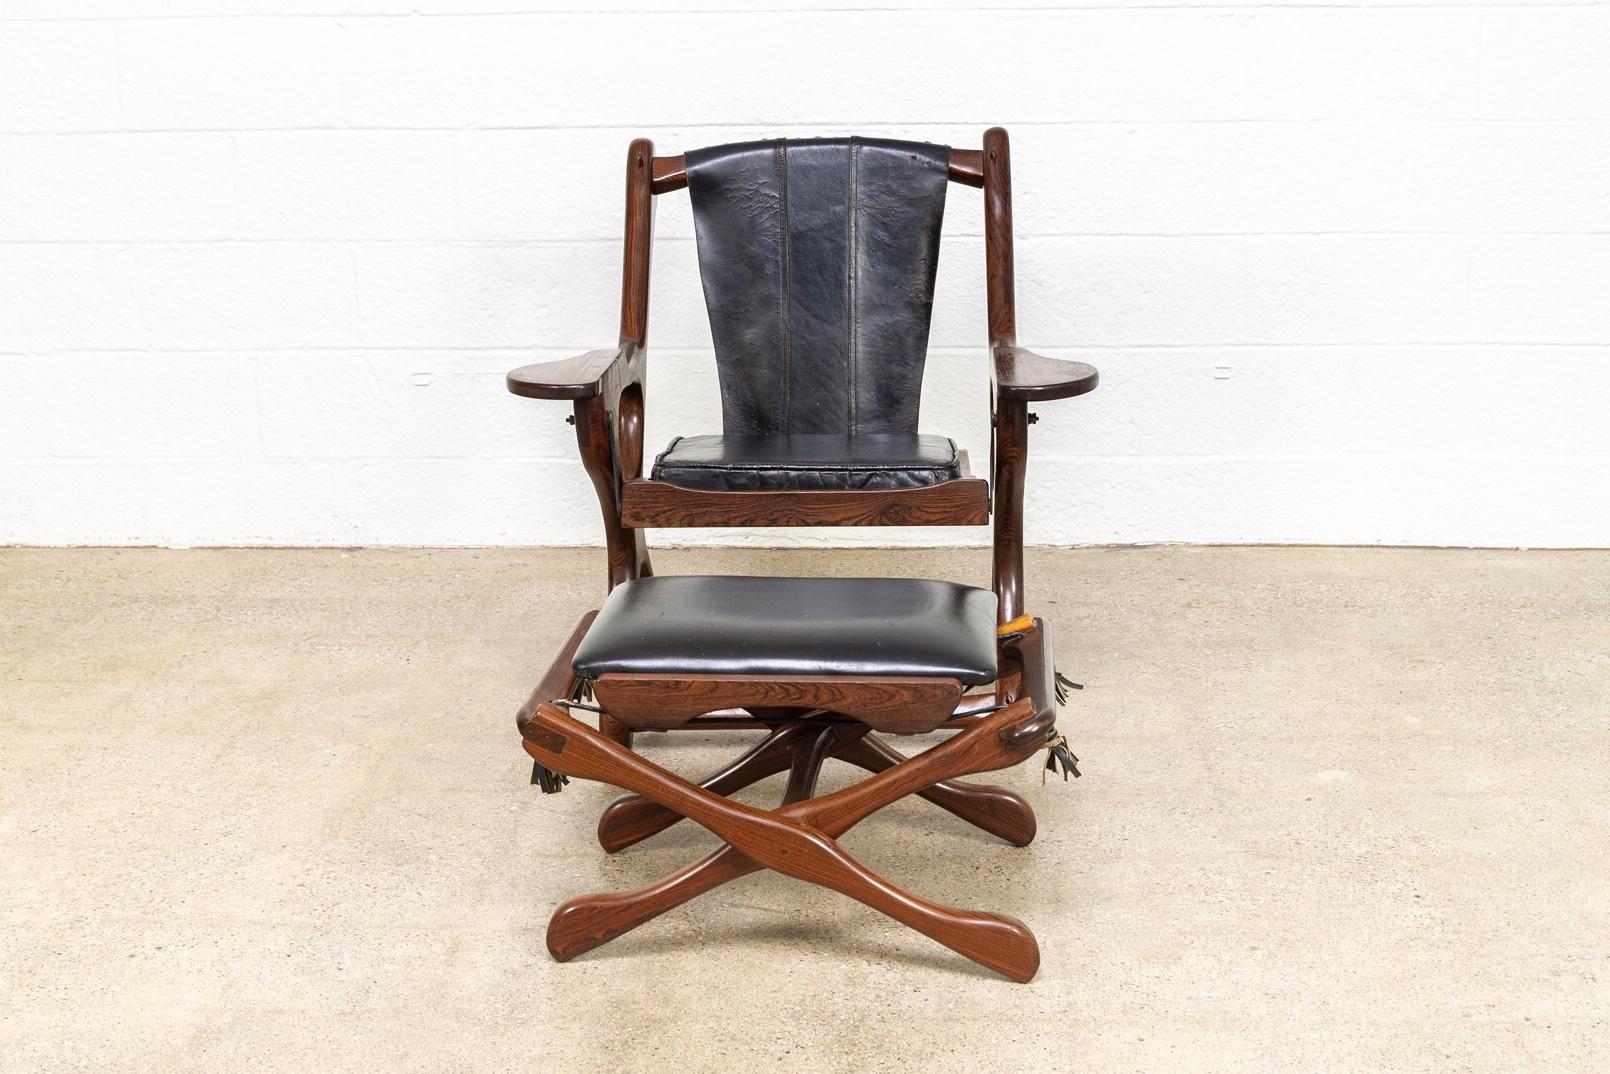 Midcentury Mexican Modern Don Shoemaker Rosewood Swinger Chair with Ottoman In Good Condition For Sale In Detroit, MI